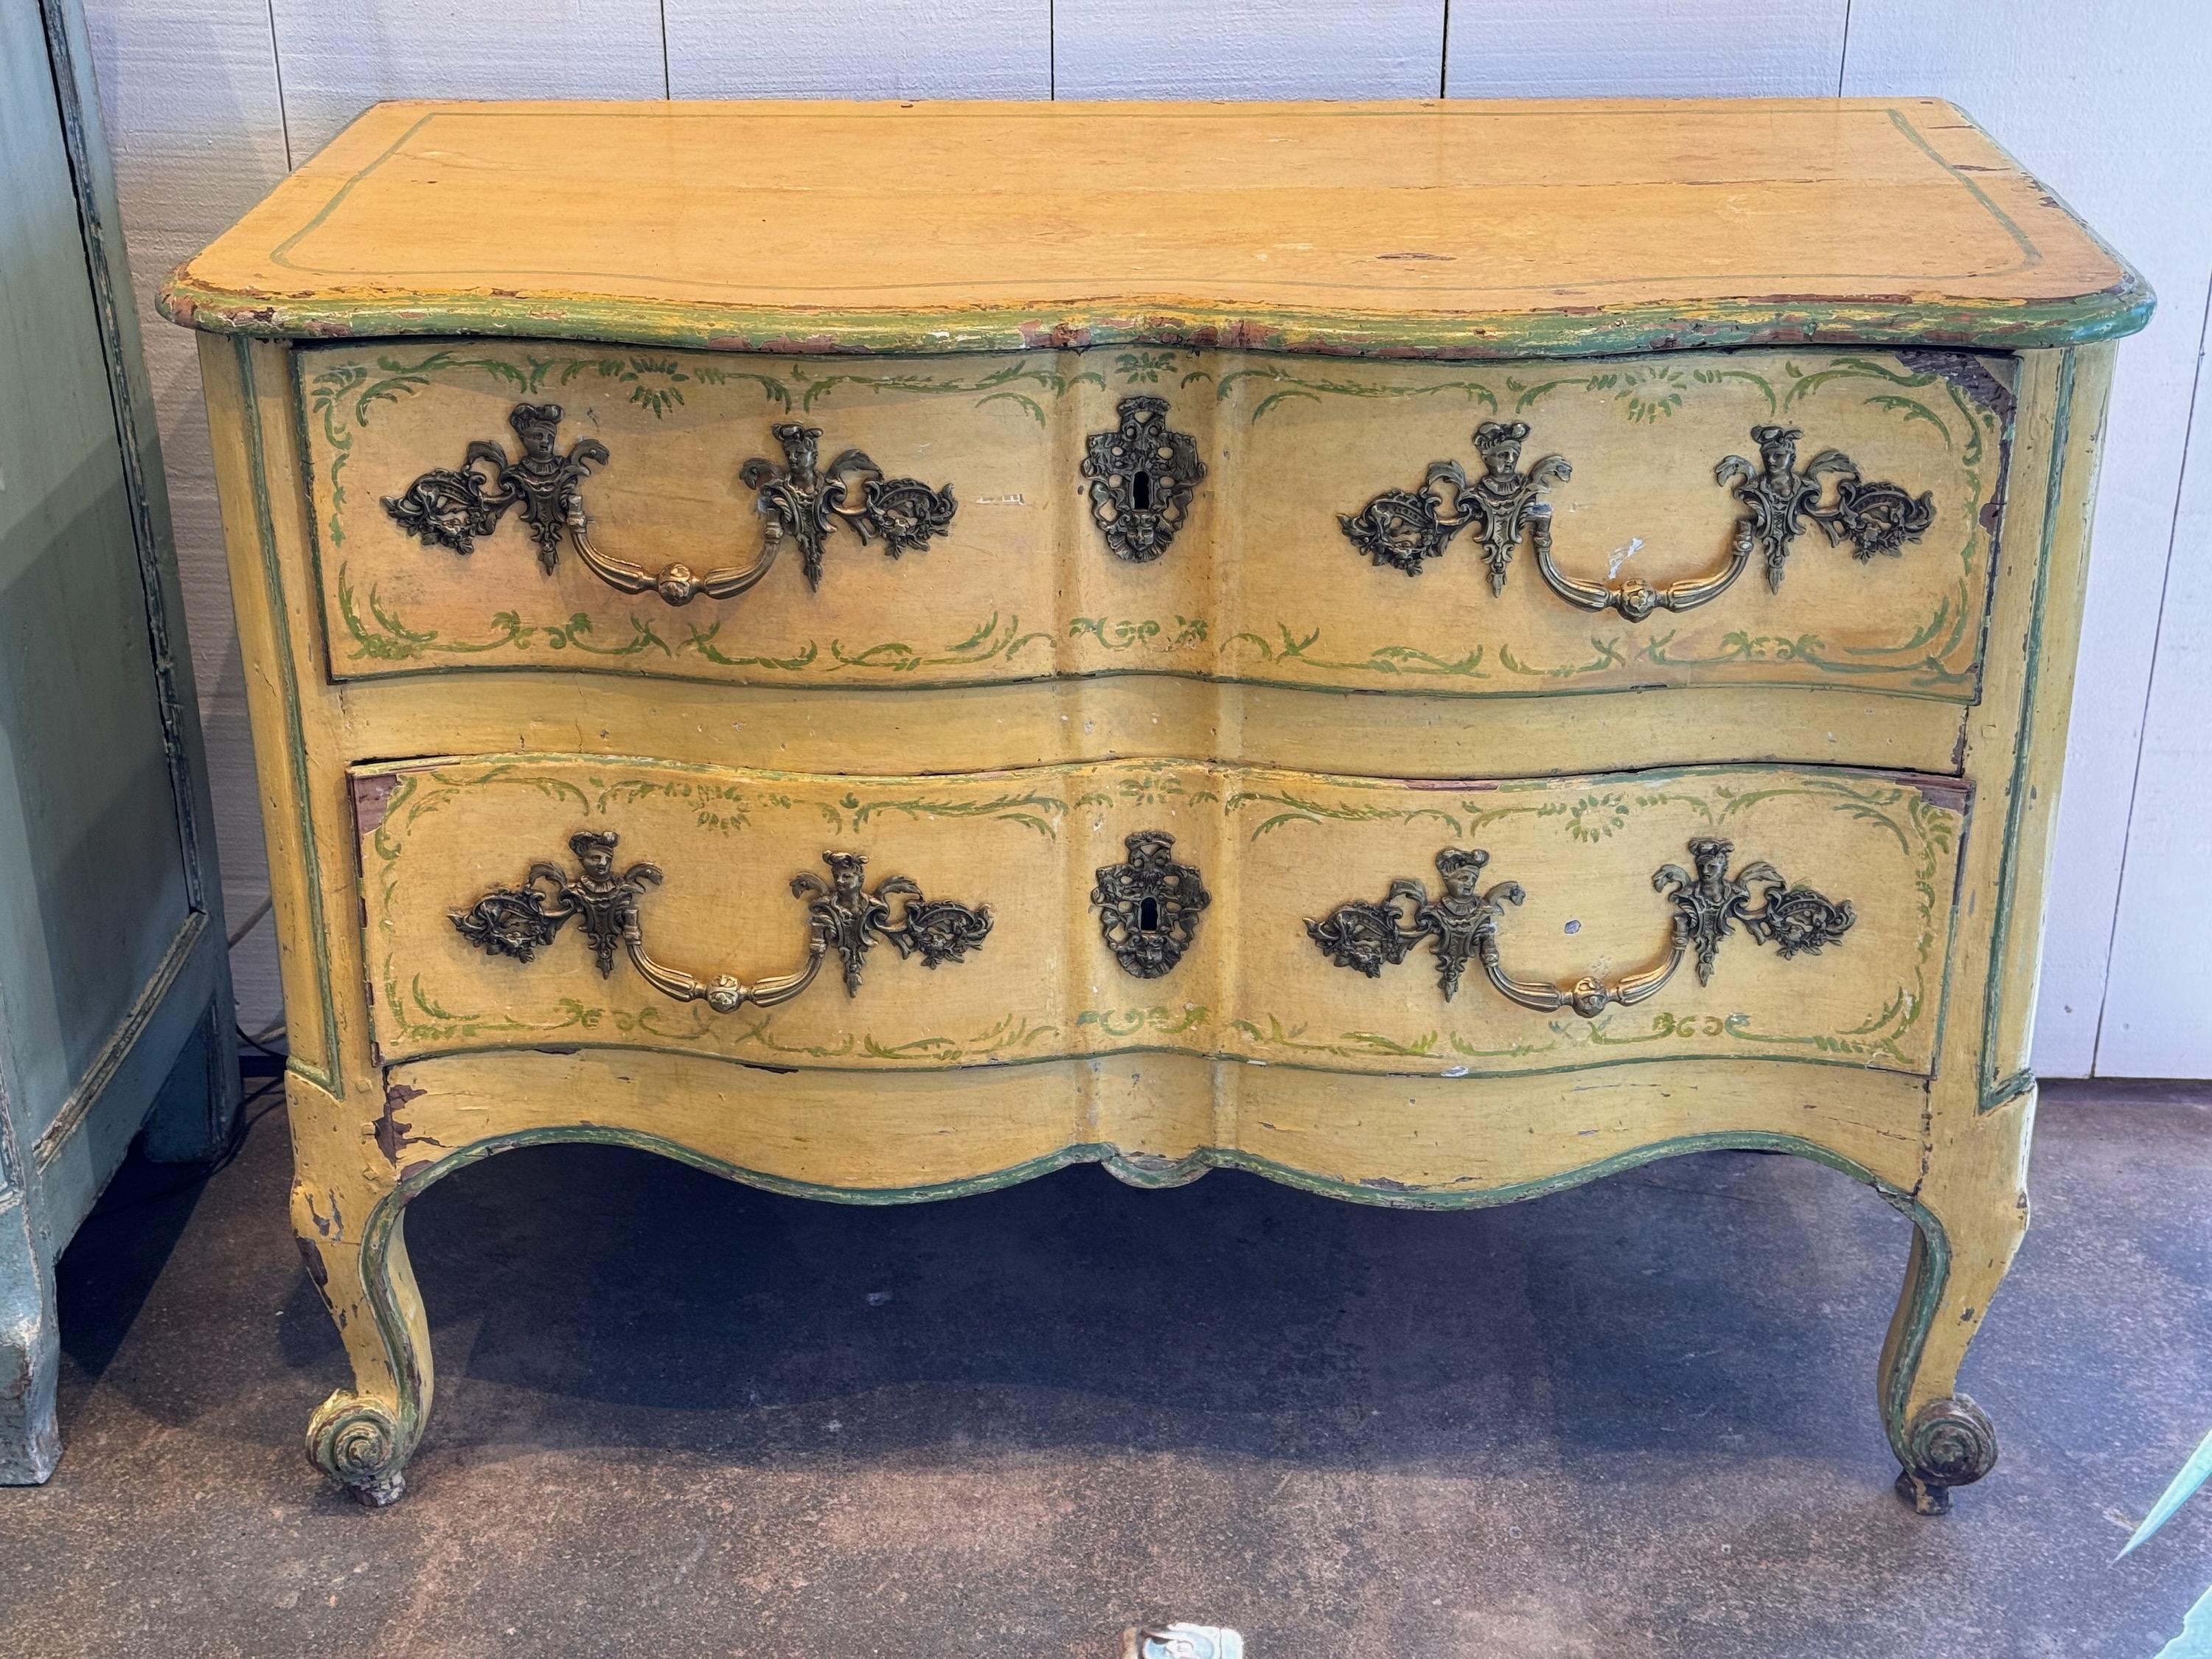 An 18thc painted French Commode. It has beautiful decoration and great hardware.